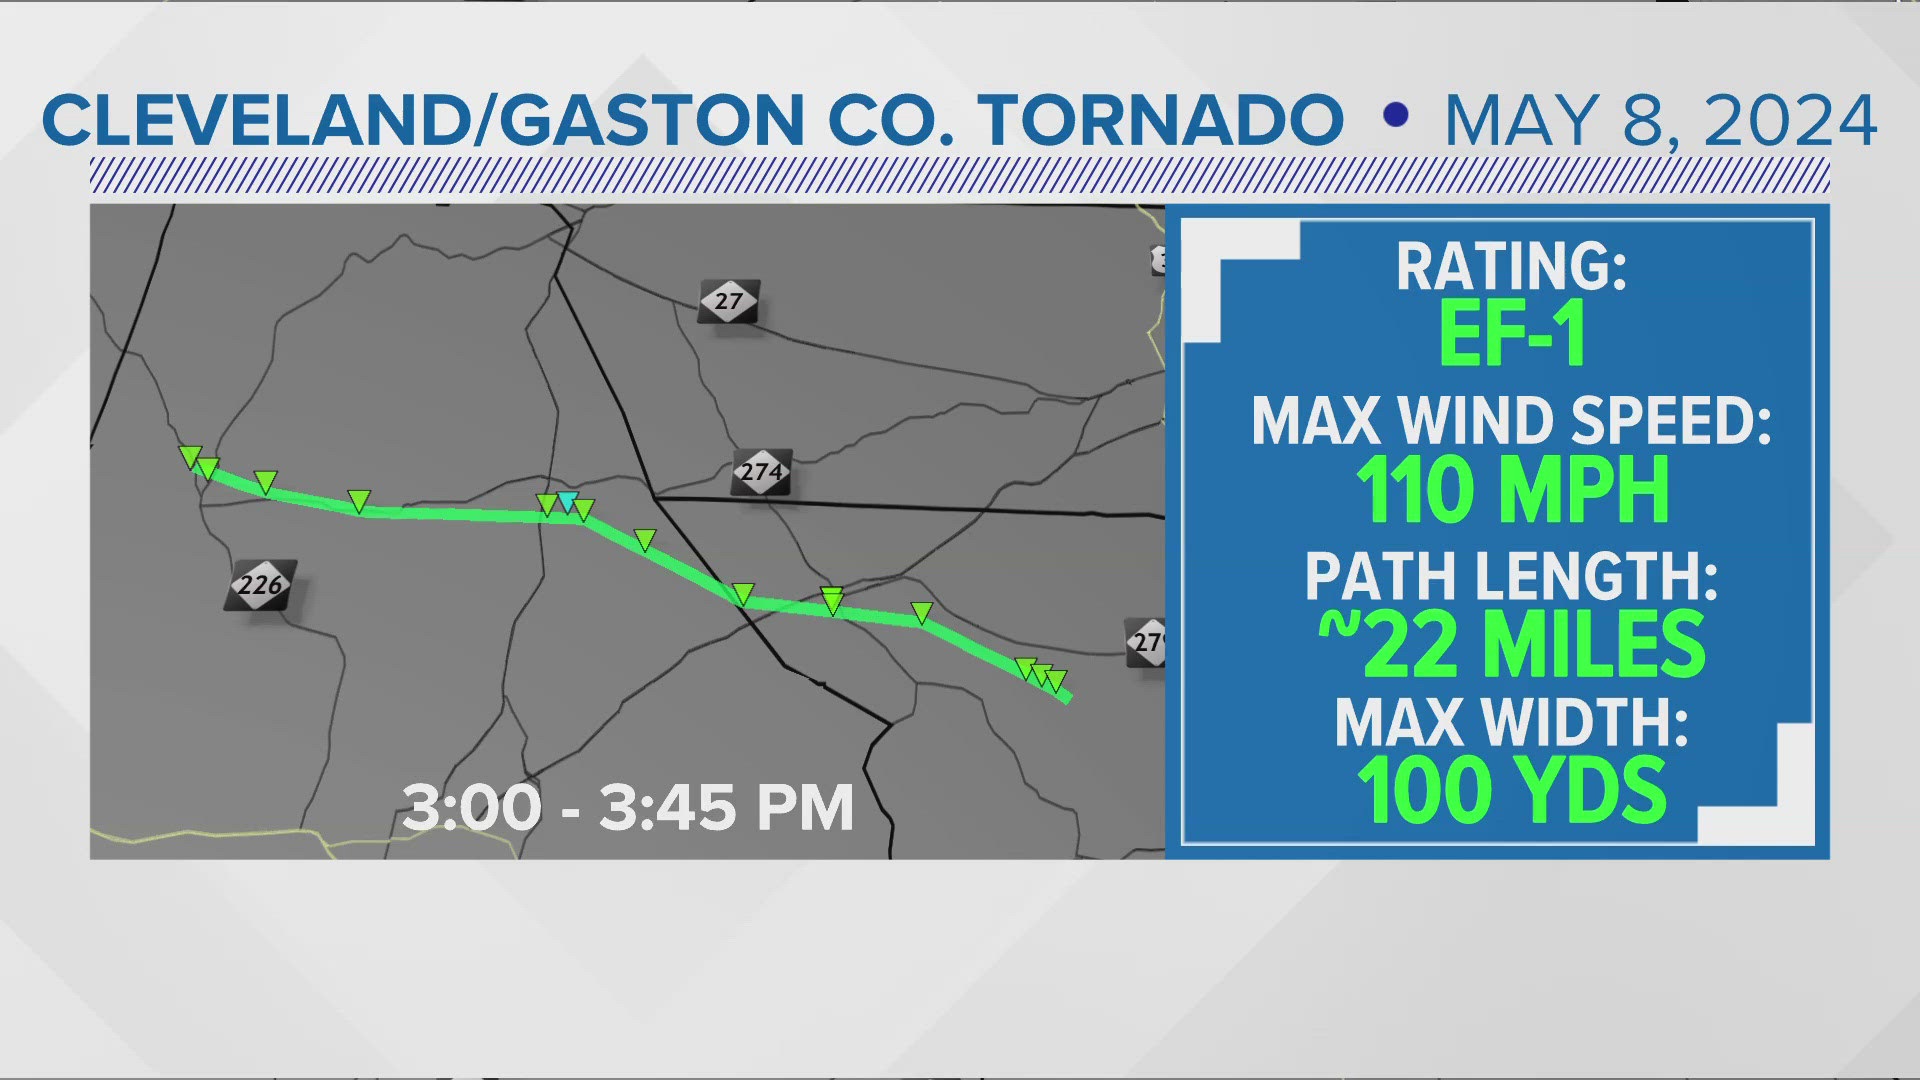 An EF1 tornado on the ground for 22 miles and with peak winds of 110 mph caused damage in Cleveland Gaston counties on Wednesday.